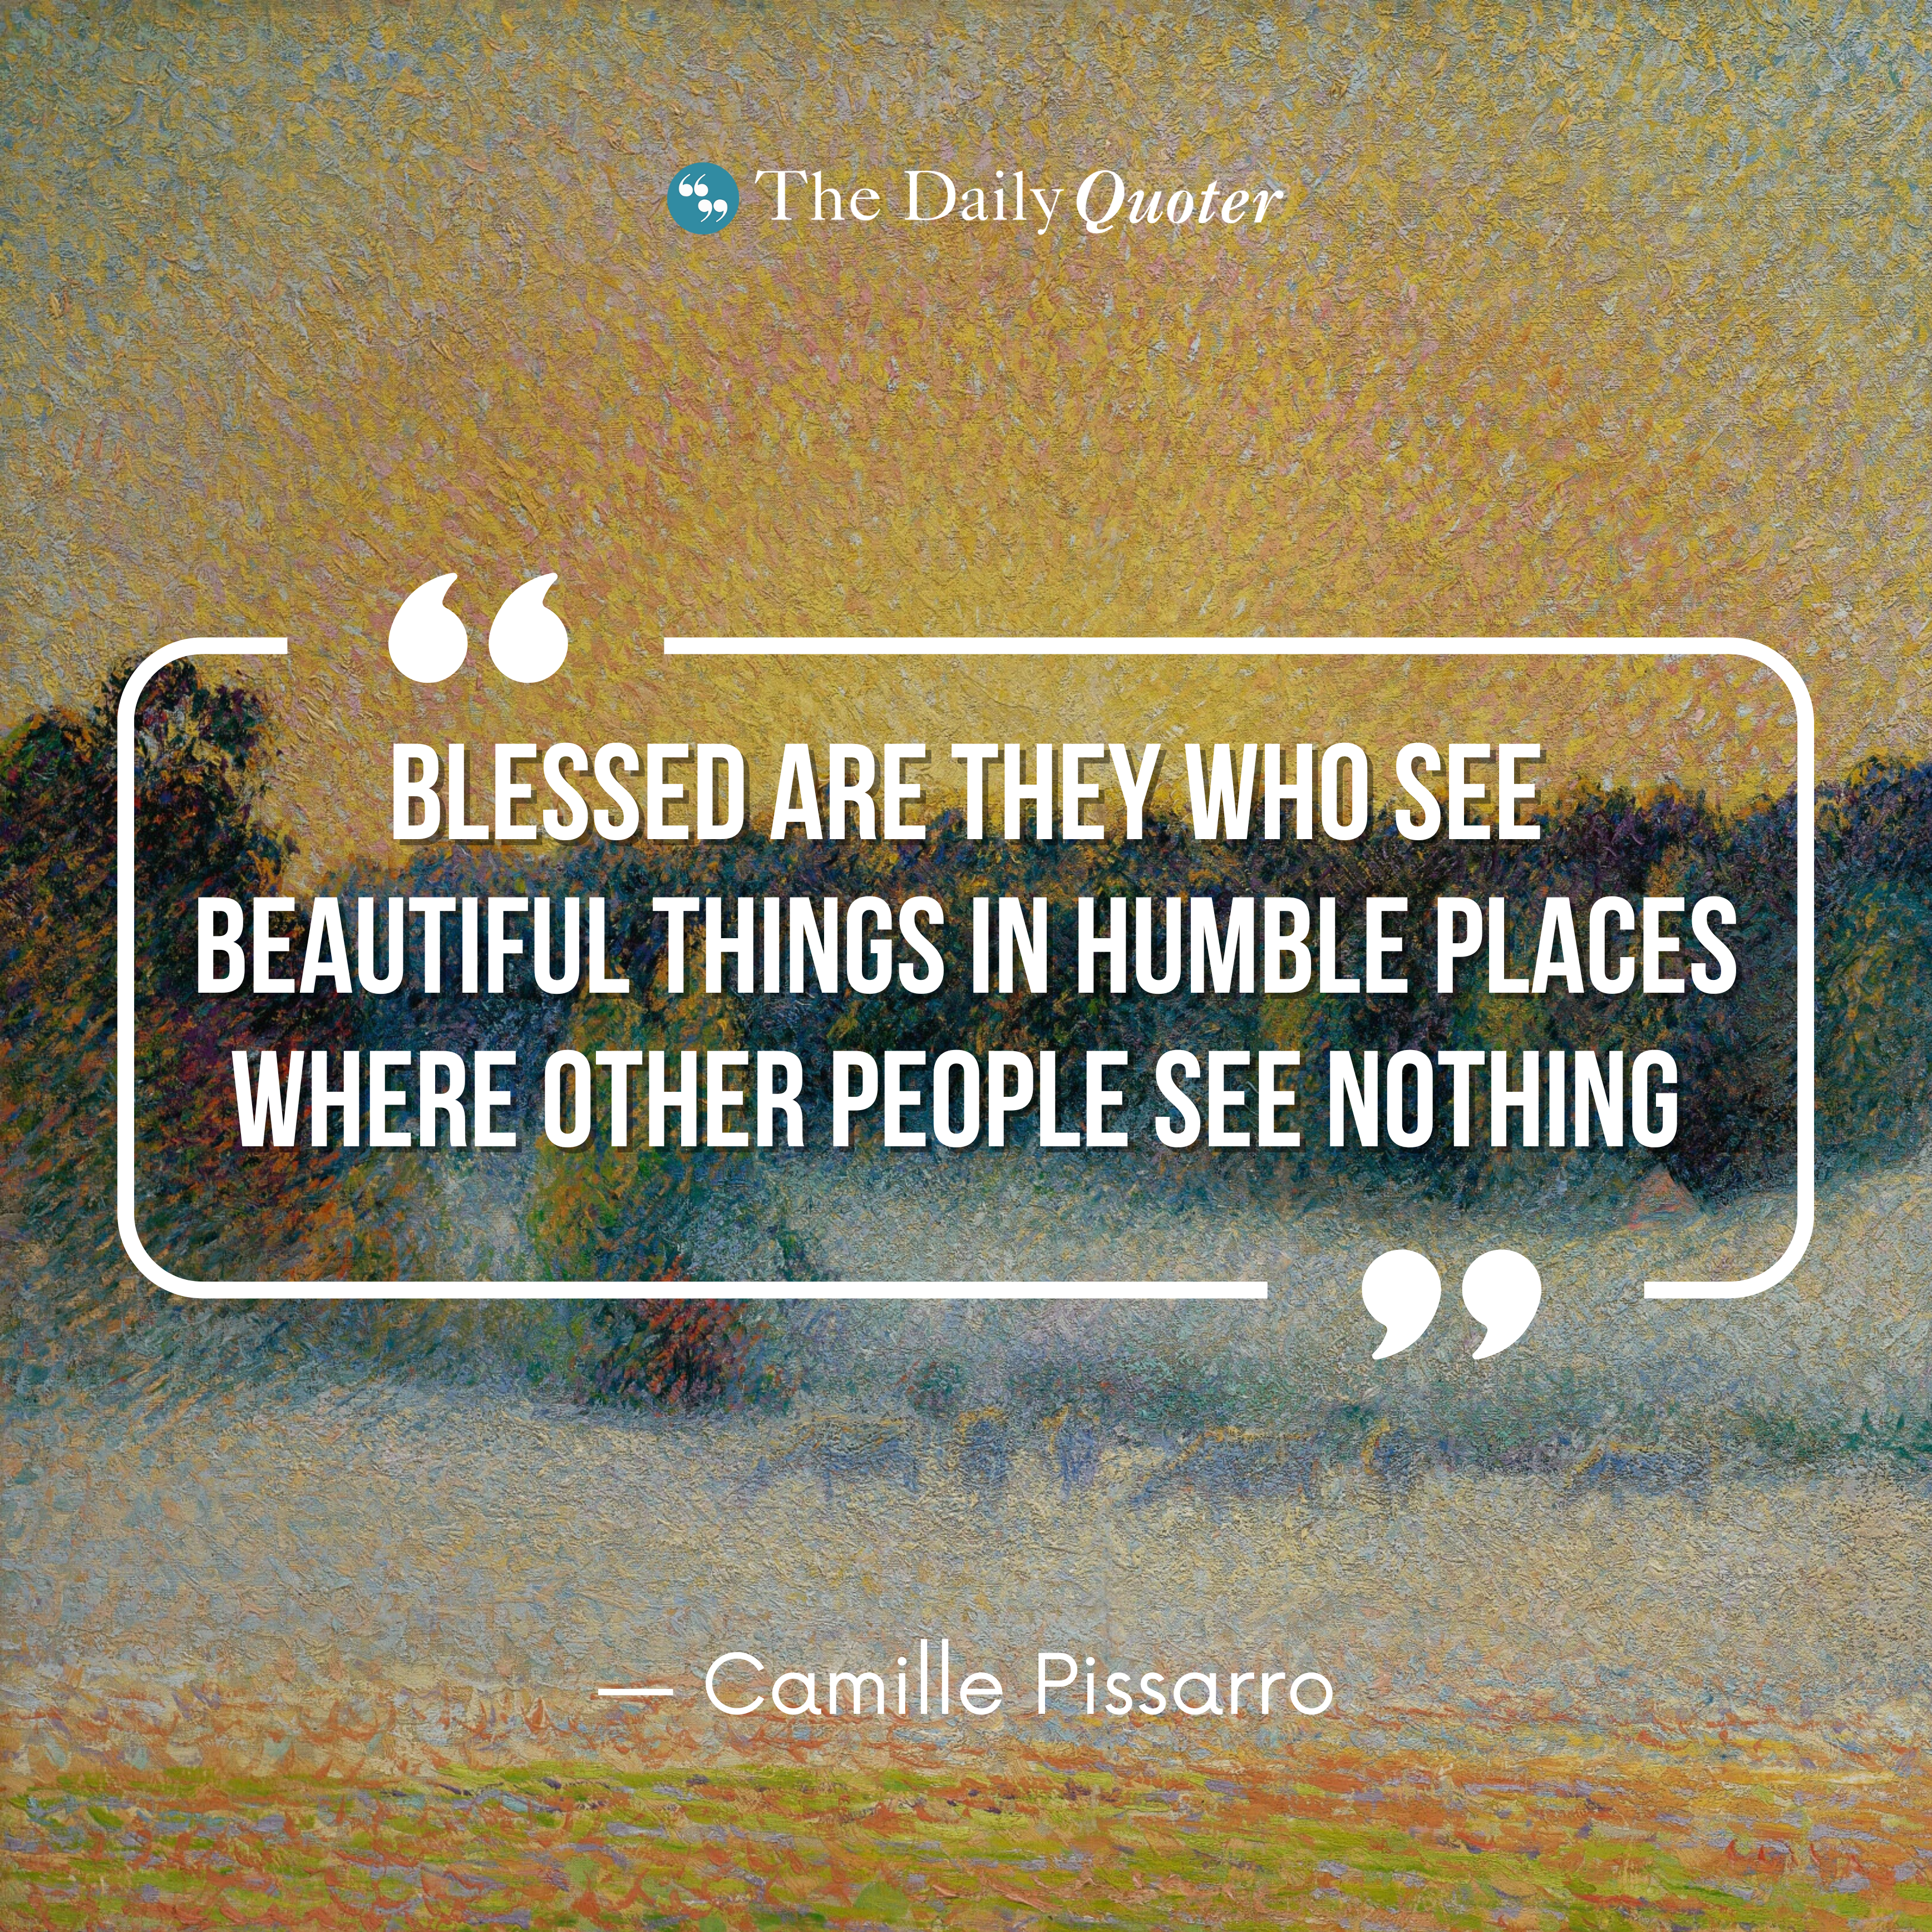 “Blessed are they who see beautiful things in humble places where other people see nothing.” ― Camille Pissarro